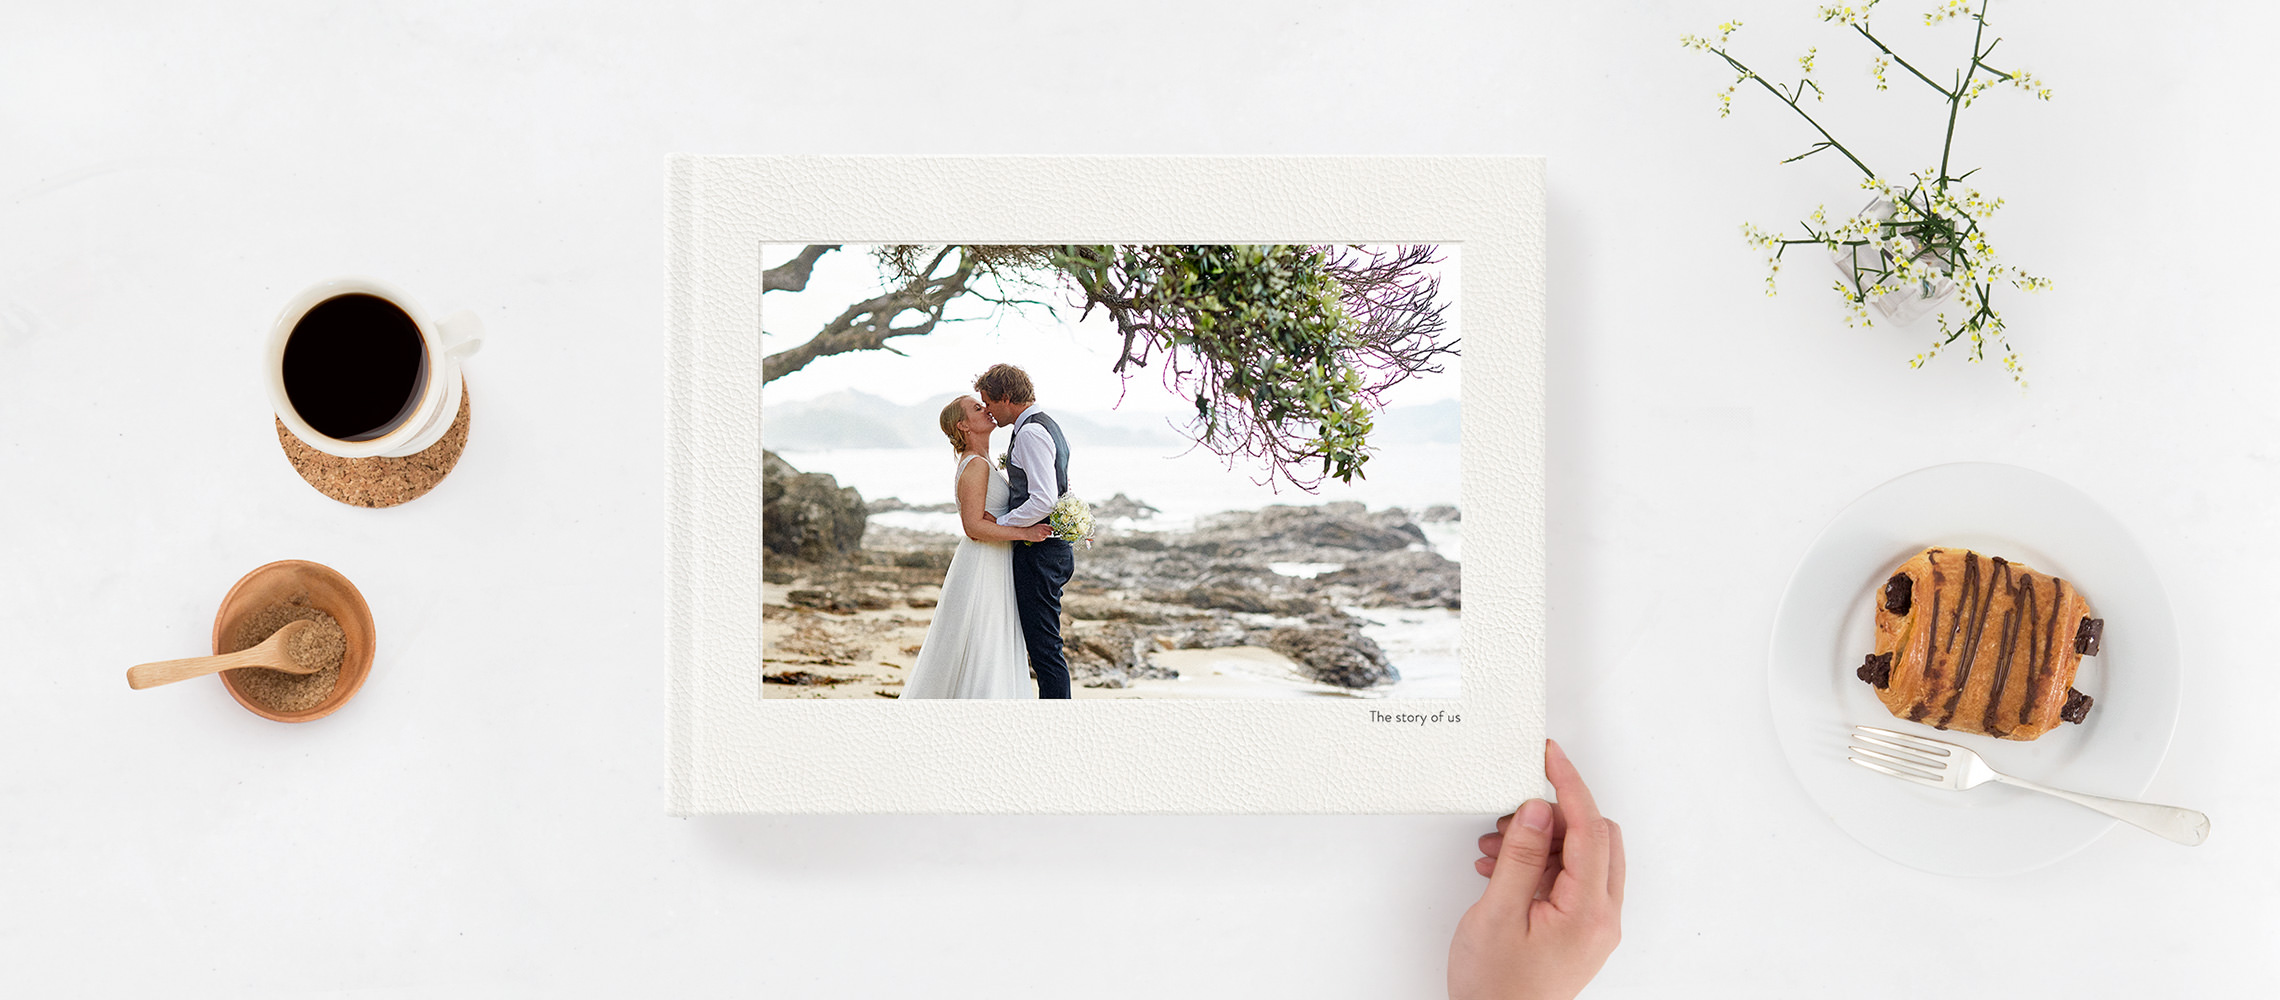 Wedding Photo Album with cover image of bride and groom kissing on beach